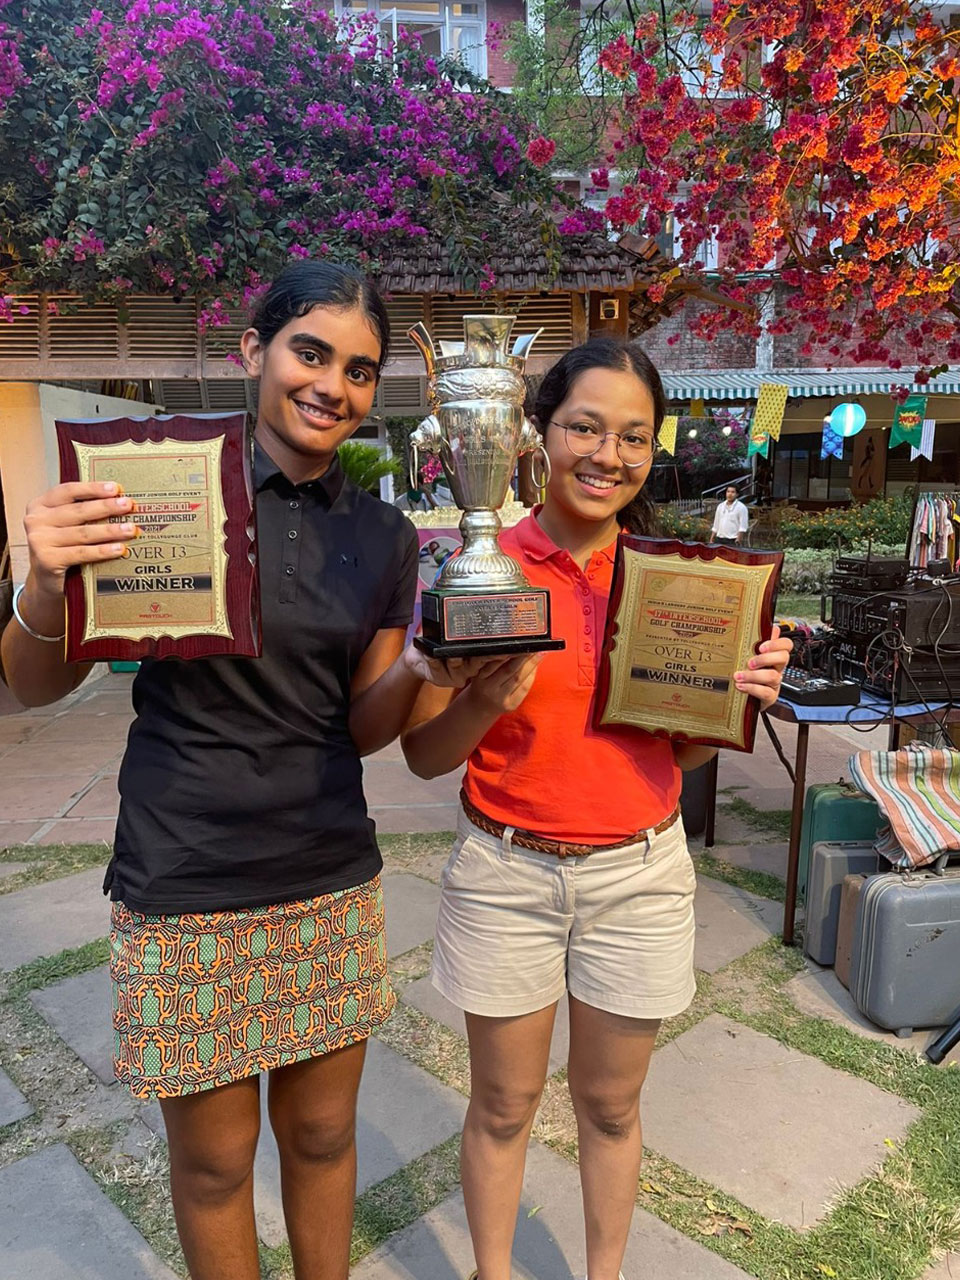 Anahat Bindra led her team to victory in the 2022 Inter School Golf Championship in Calcutta.